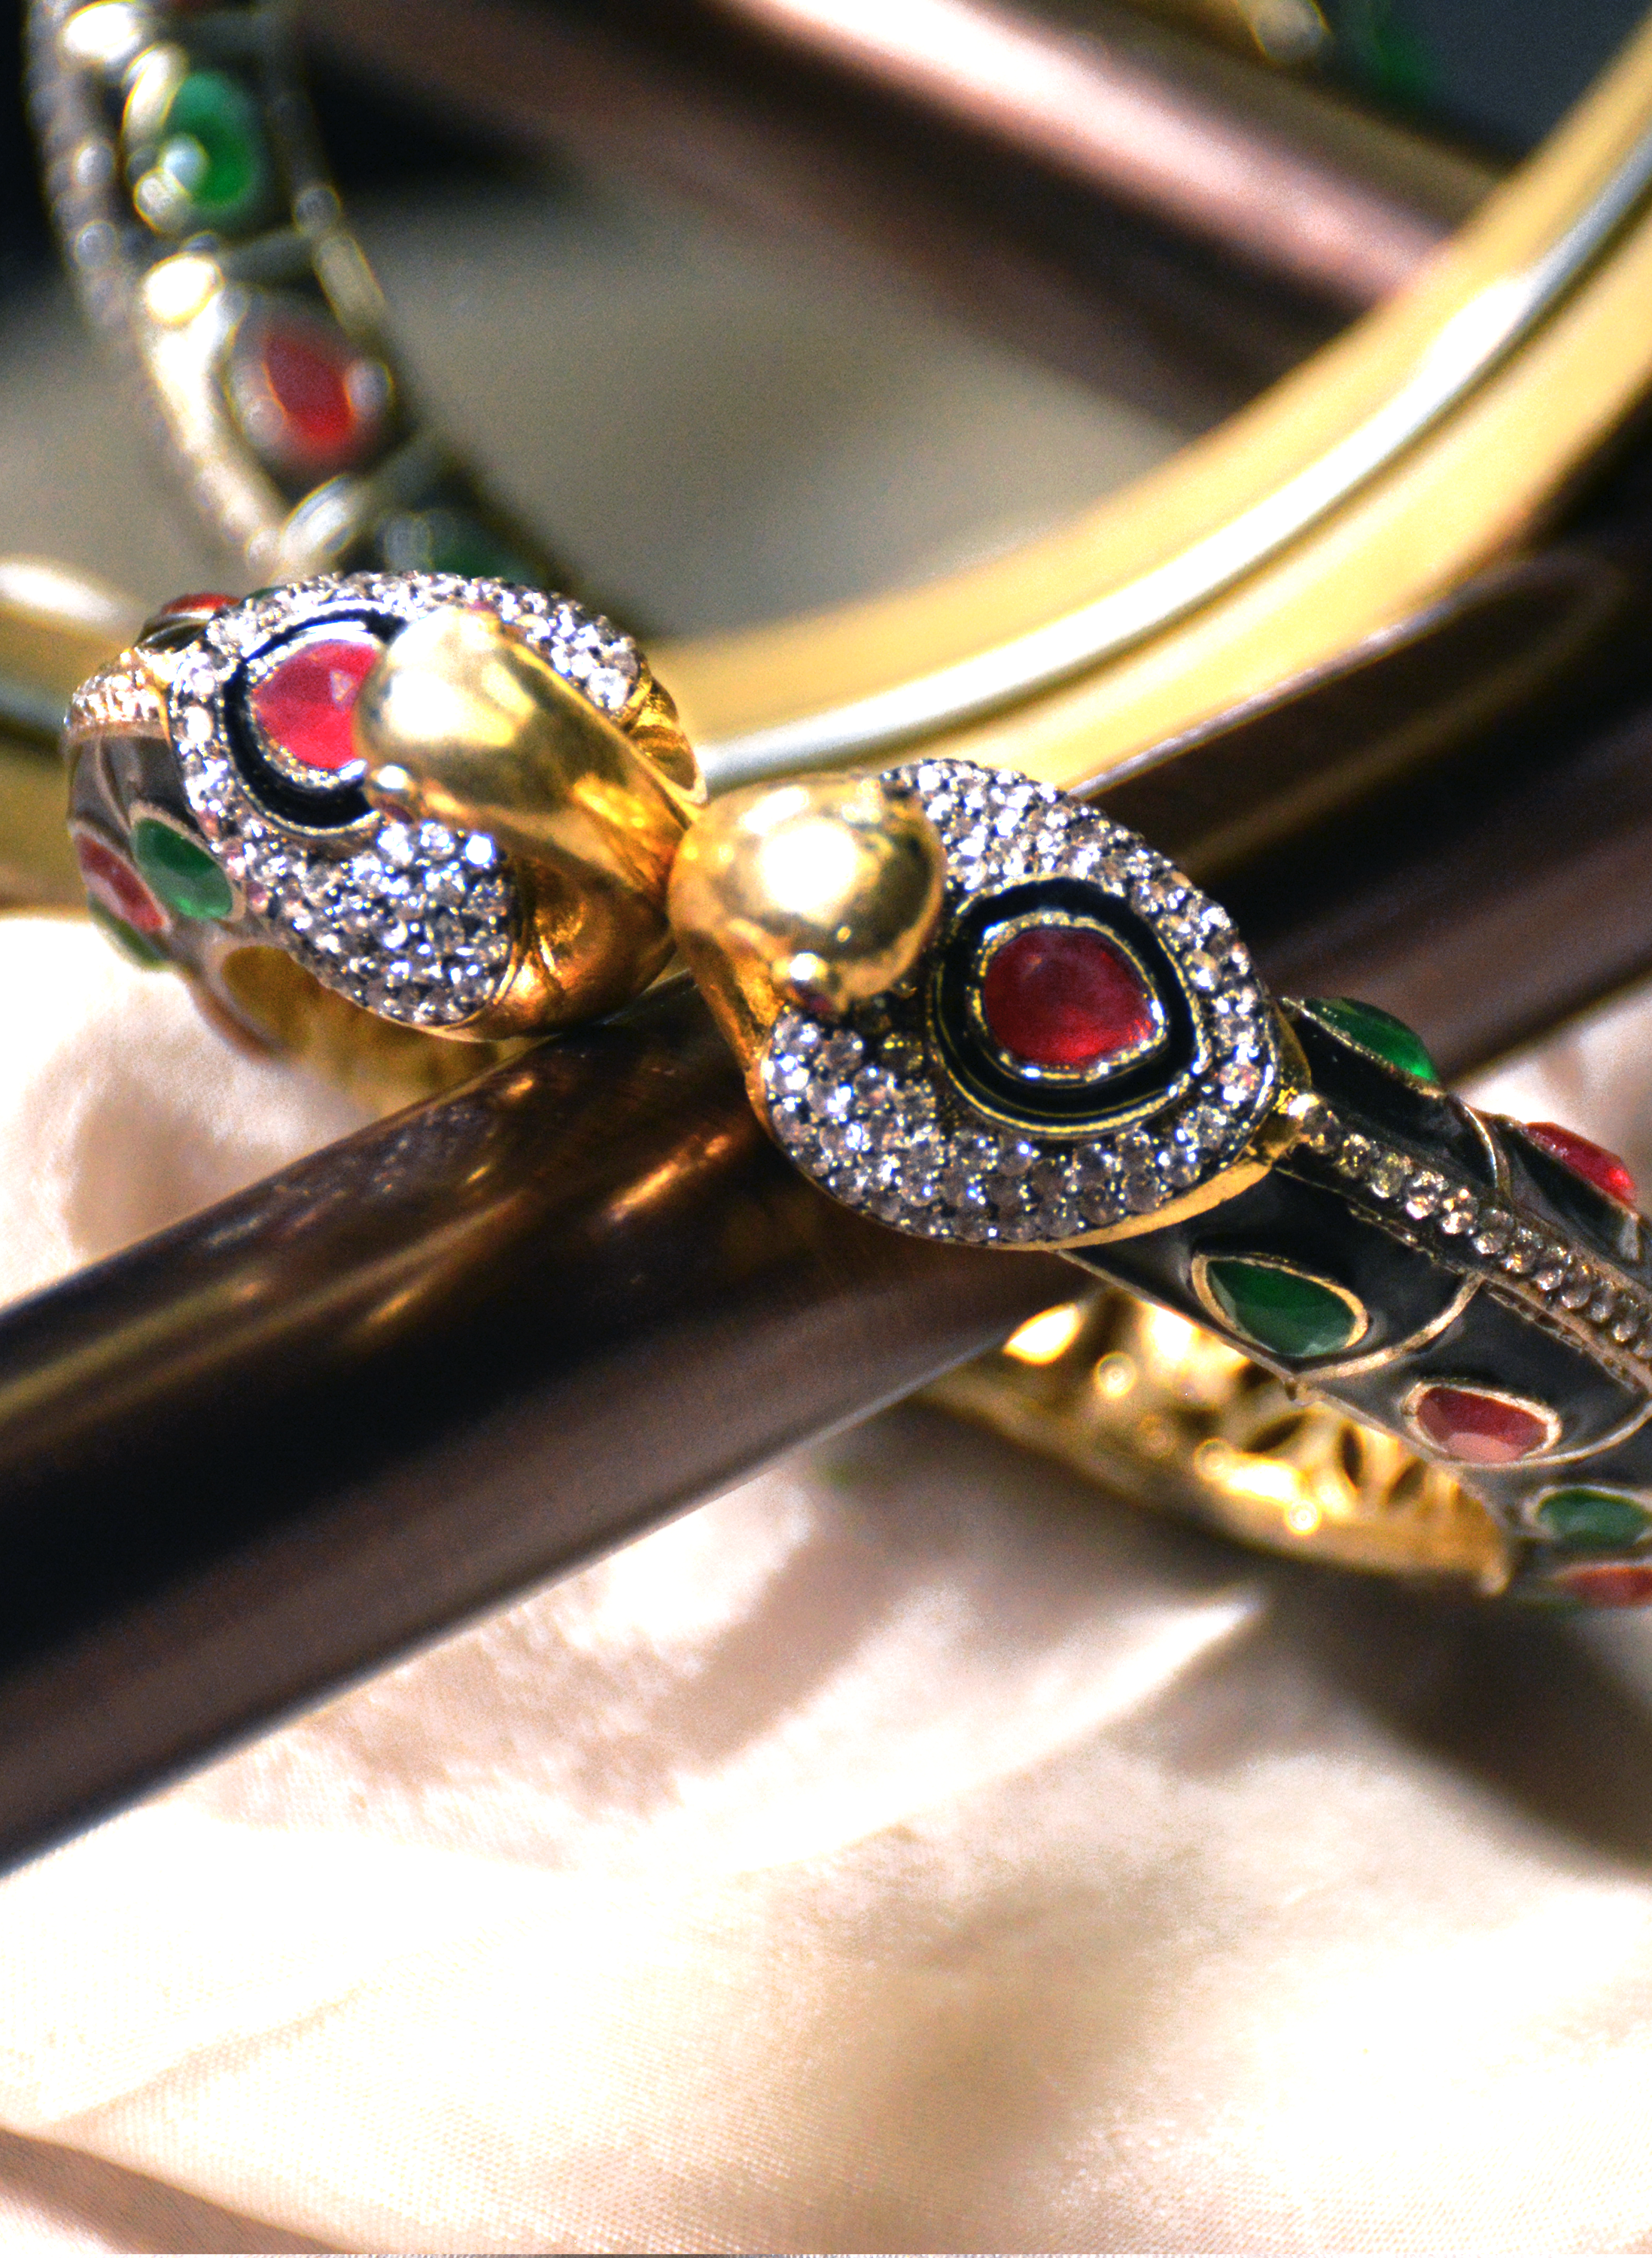 Swan Cuff bracelet with Rubys and Emeralds